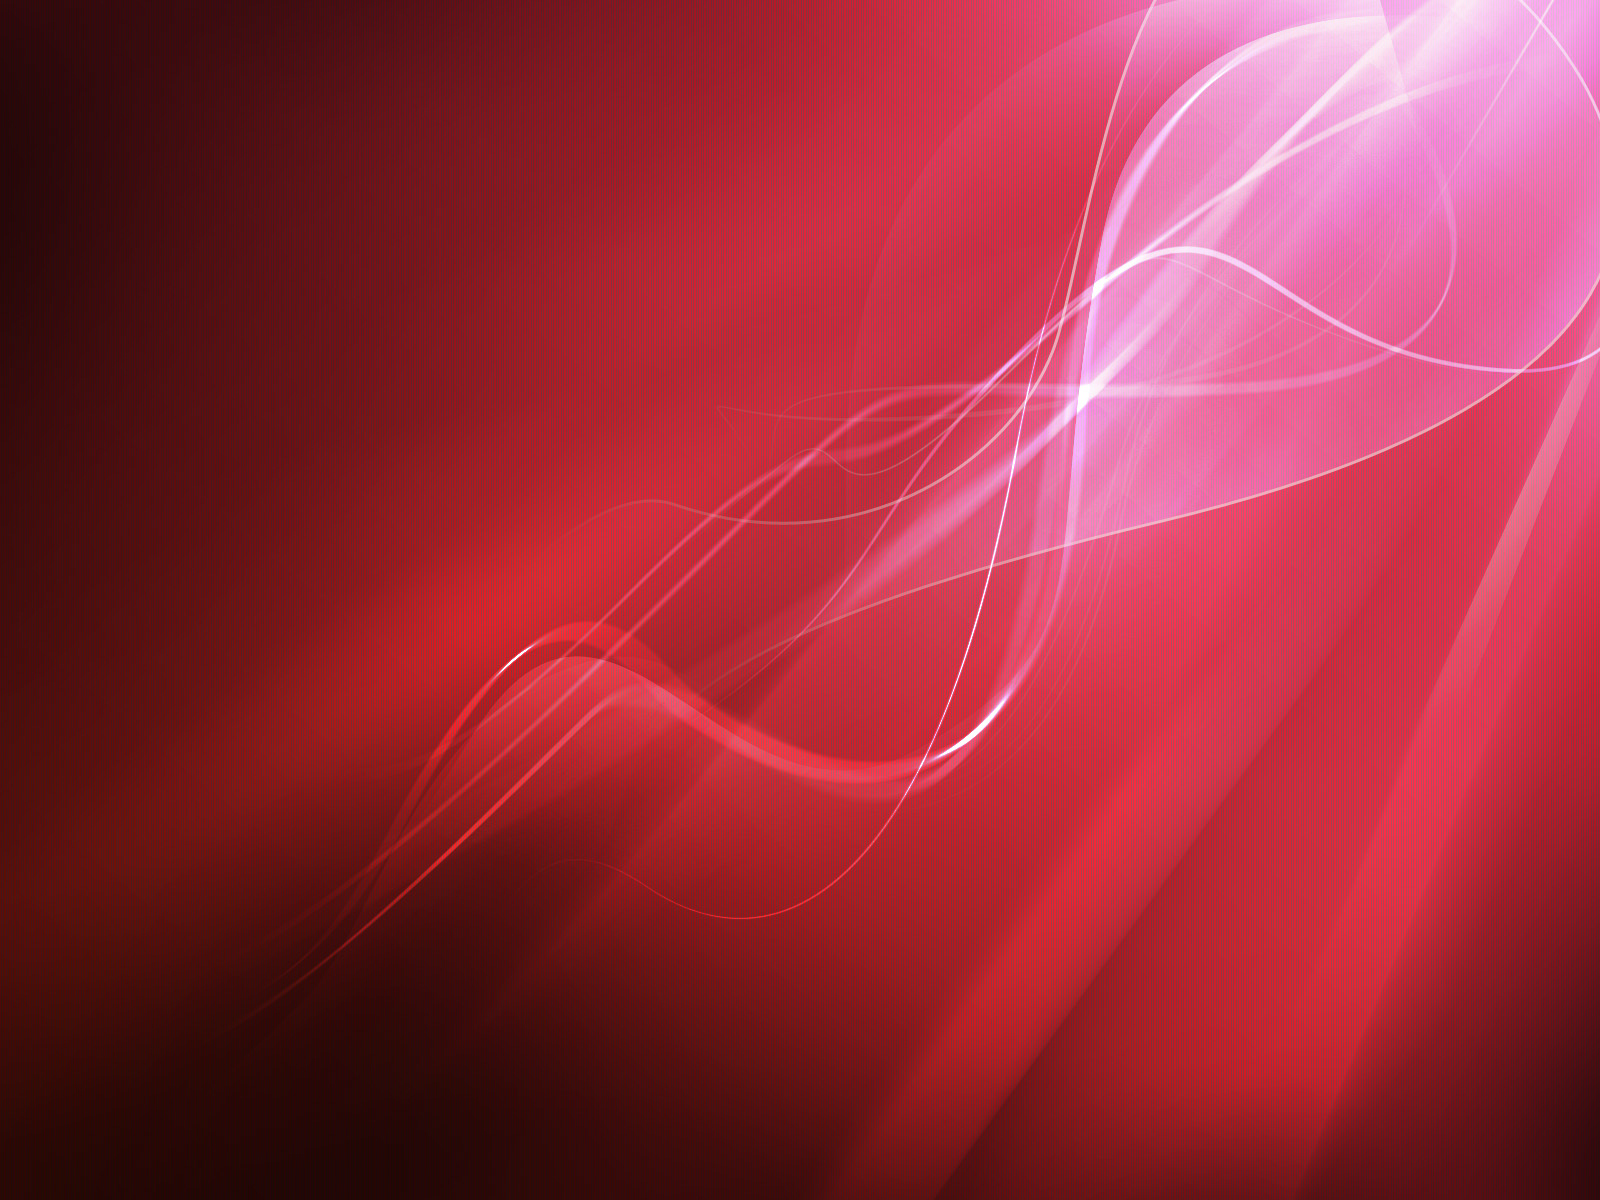 Red Wallpaper Photos Download The BEST Free Red Wallpaper Stock Photos  HD  Images